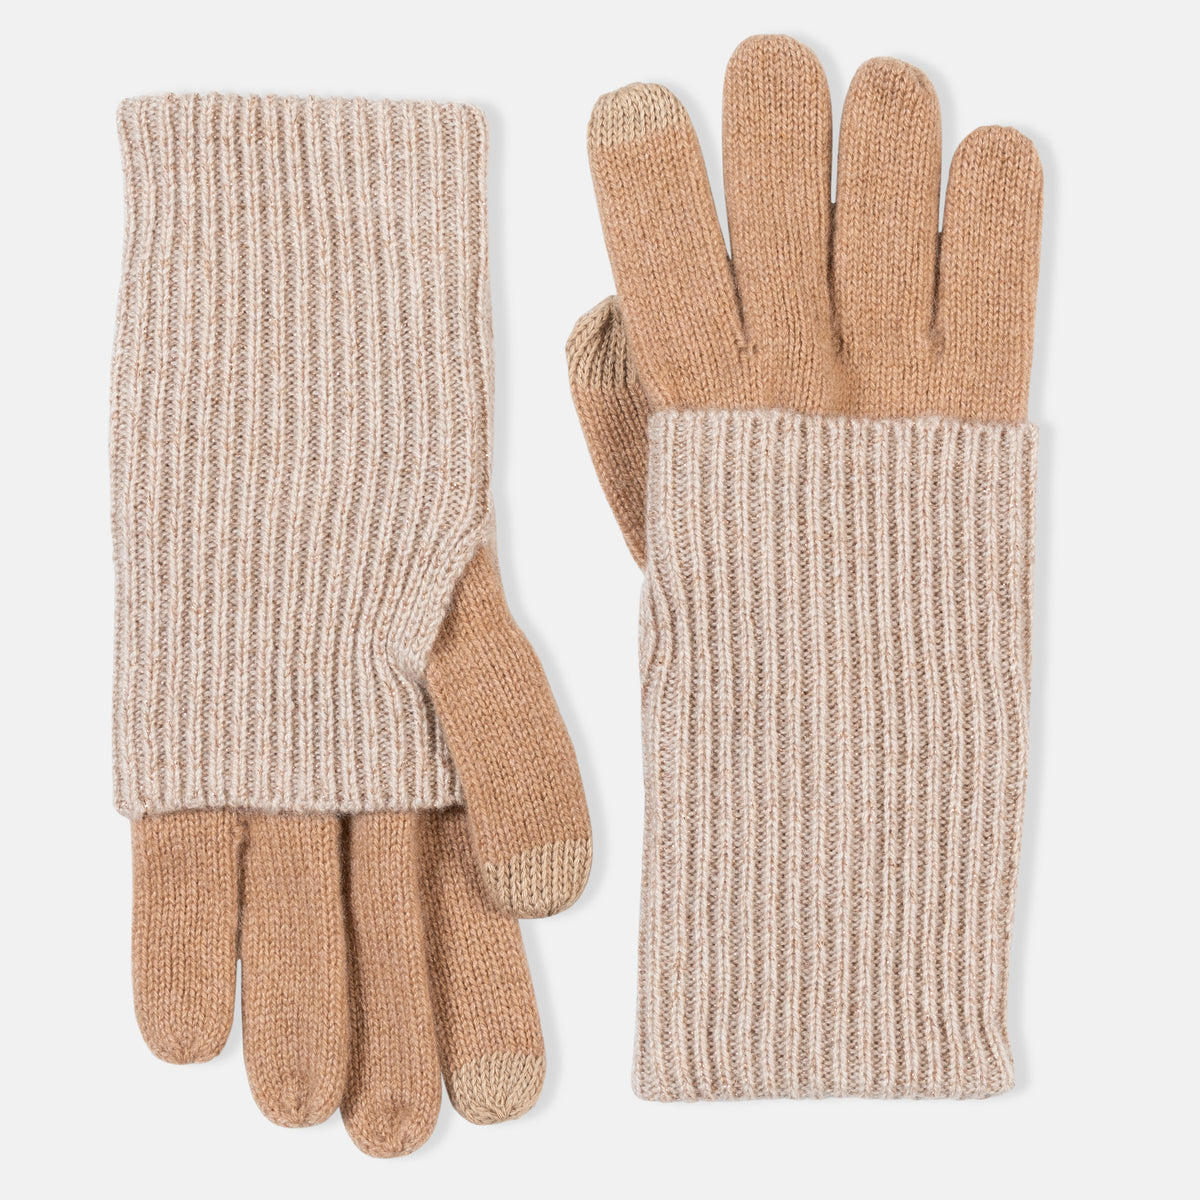 Picture of knitted cashmere gloves with foldover contrast sparkle cuff in camel and tan.